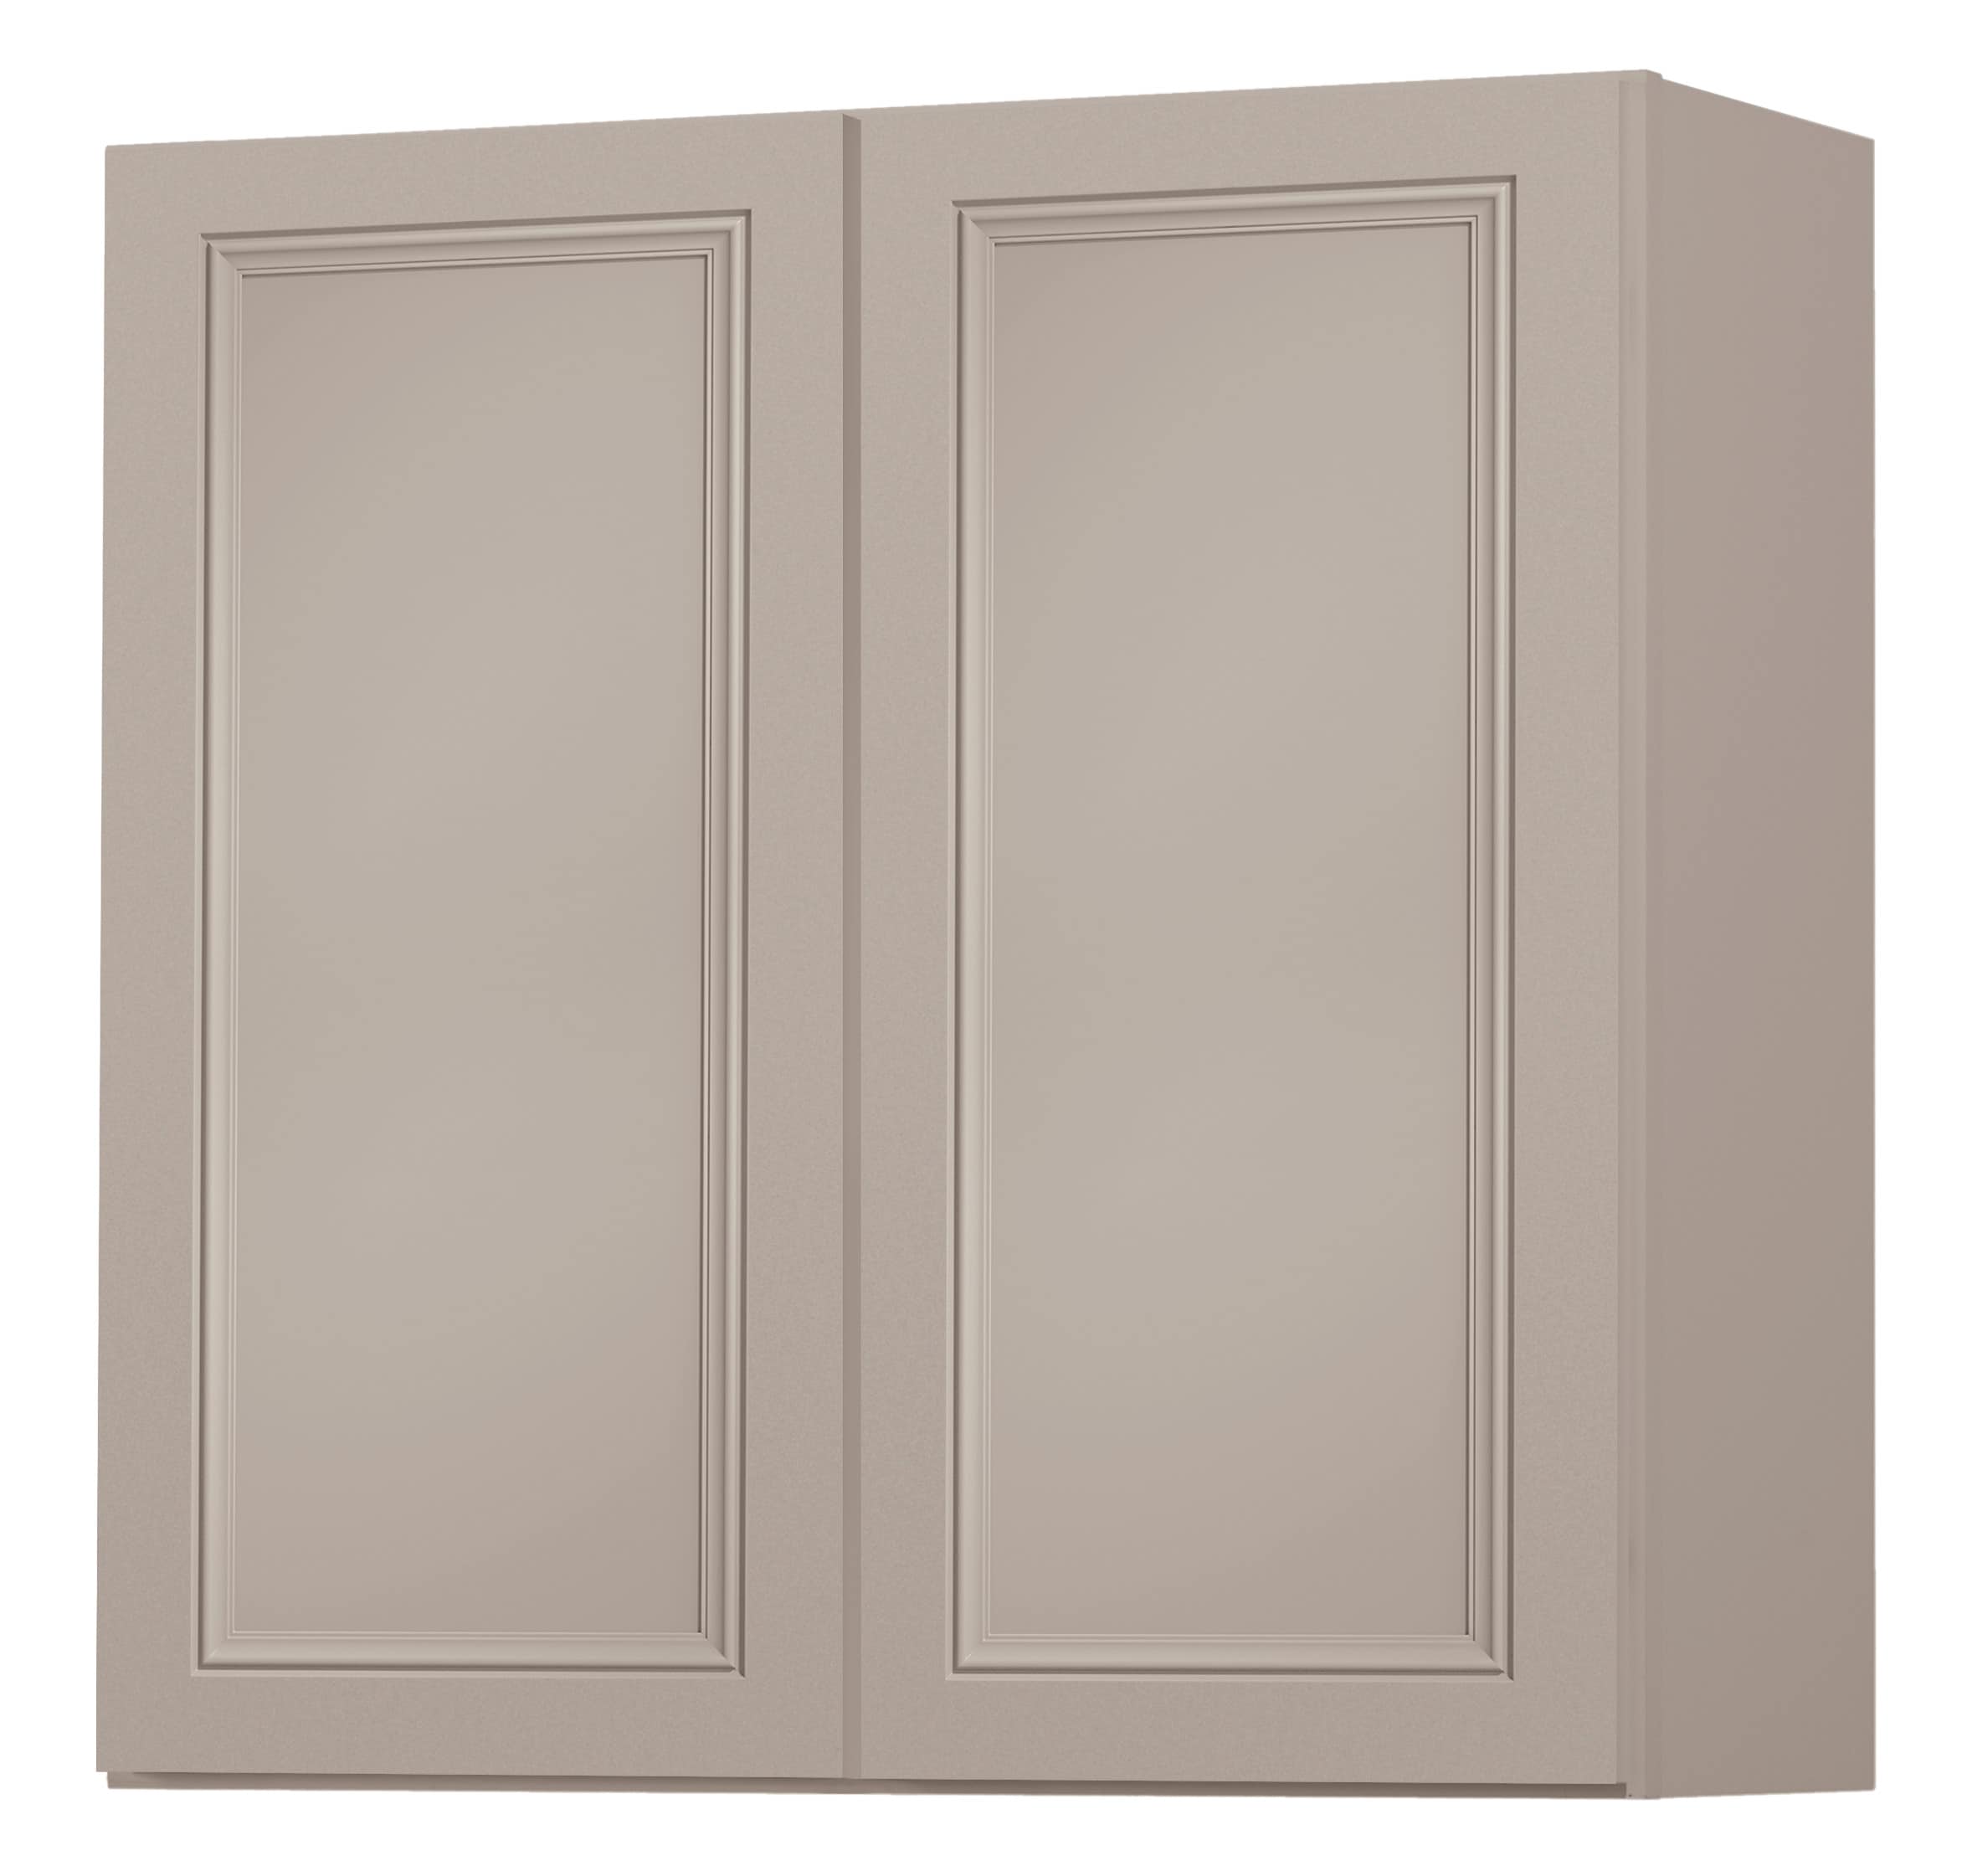 Wintucket 30-in W x 36-in H x 12-in D Cloud Gray Door Wall Fully Assembled Cabinet (Recessed Panel Square Door Style) | - Diamond NOW G15 W3036B